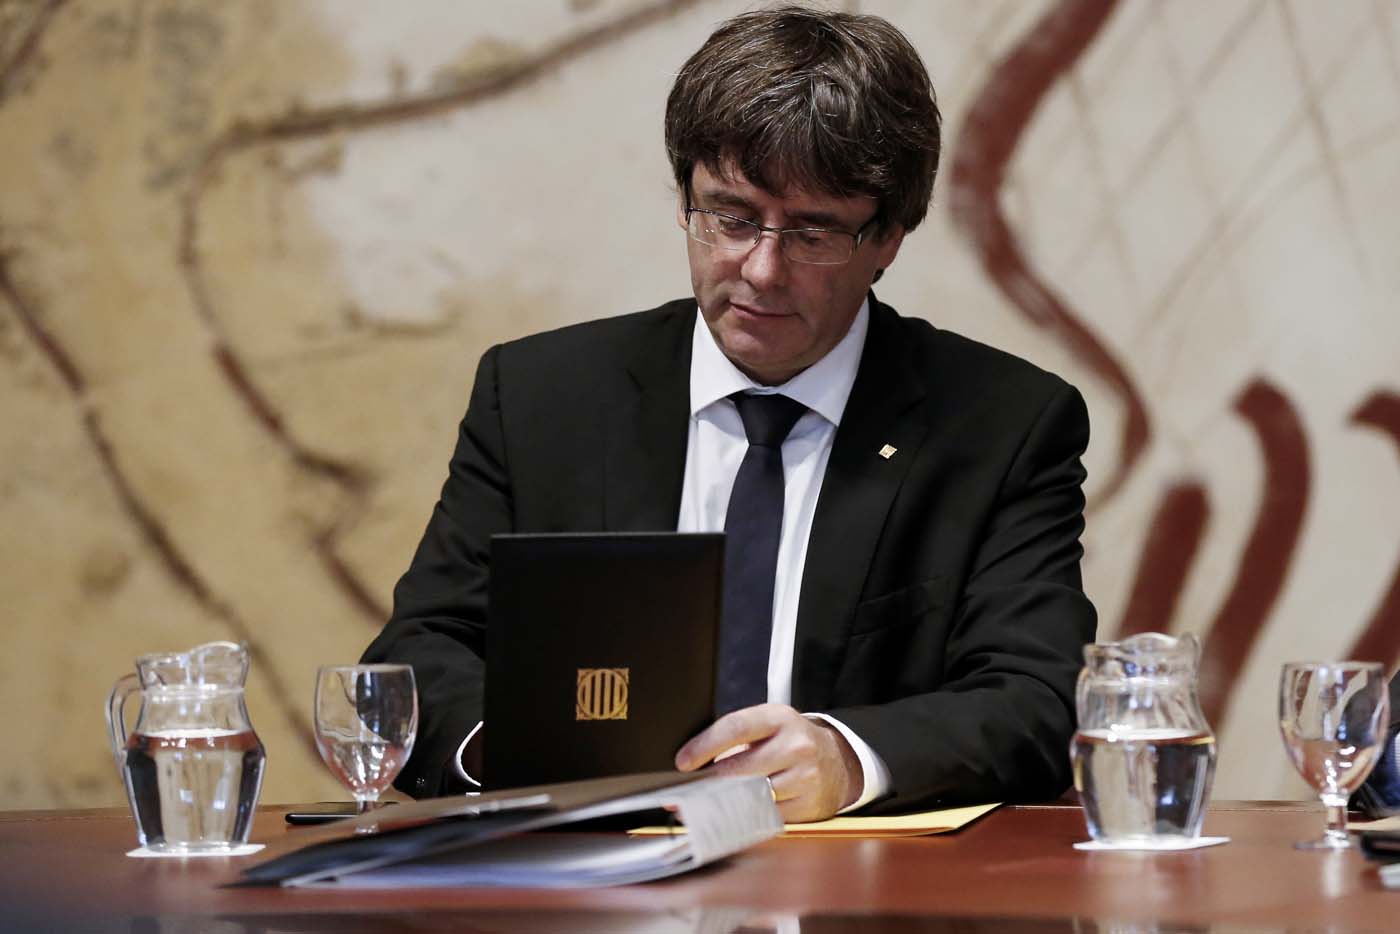 Catalan regional government president Carles Puigdemont attends a regional government meeting at the Generalitat Palace in Barcelona on October 10, 2017. Spain's worst political crisis in a generation will come to a head as Catalonia's leader could declare independence from Madrid in a move likely to send shockwaves through Europe. / AFP PHOTO / PAU BARRENA